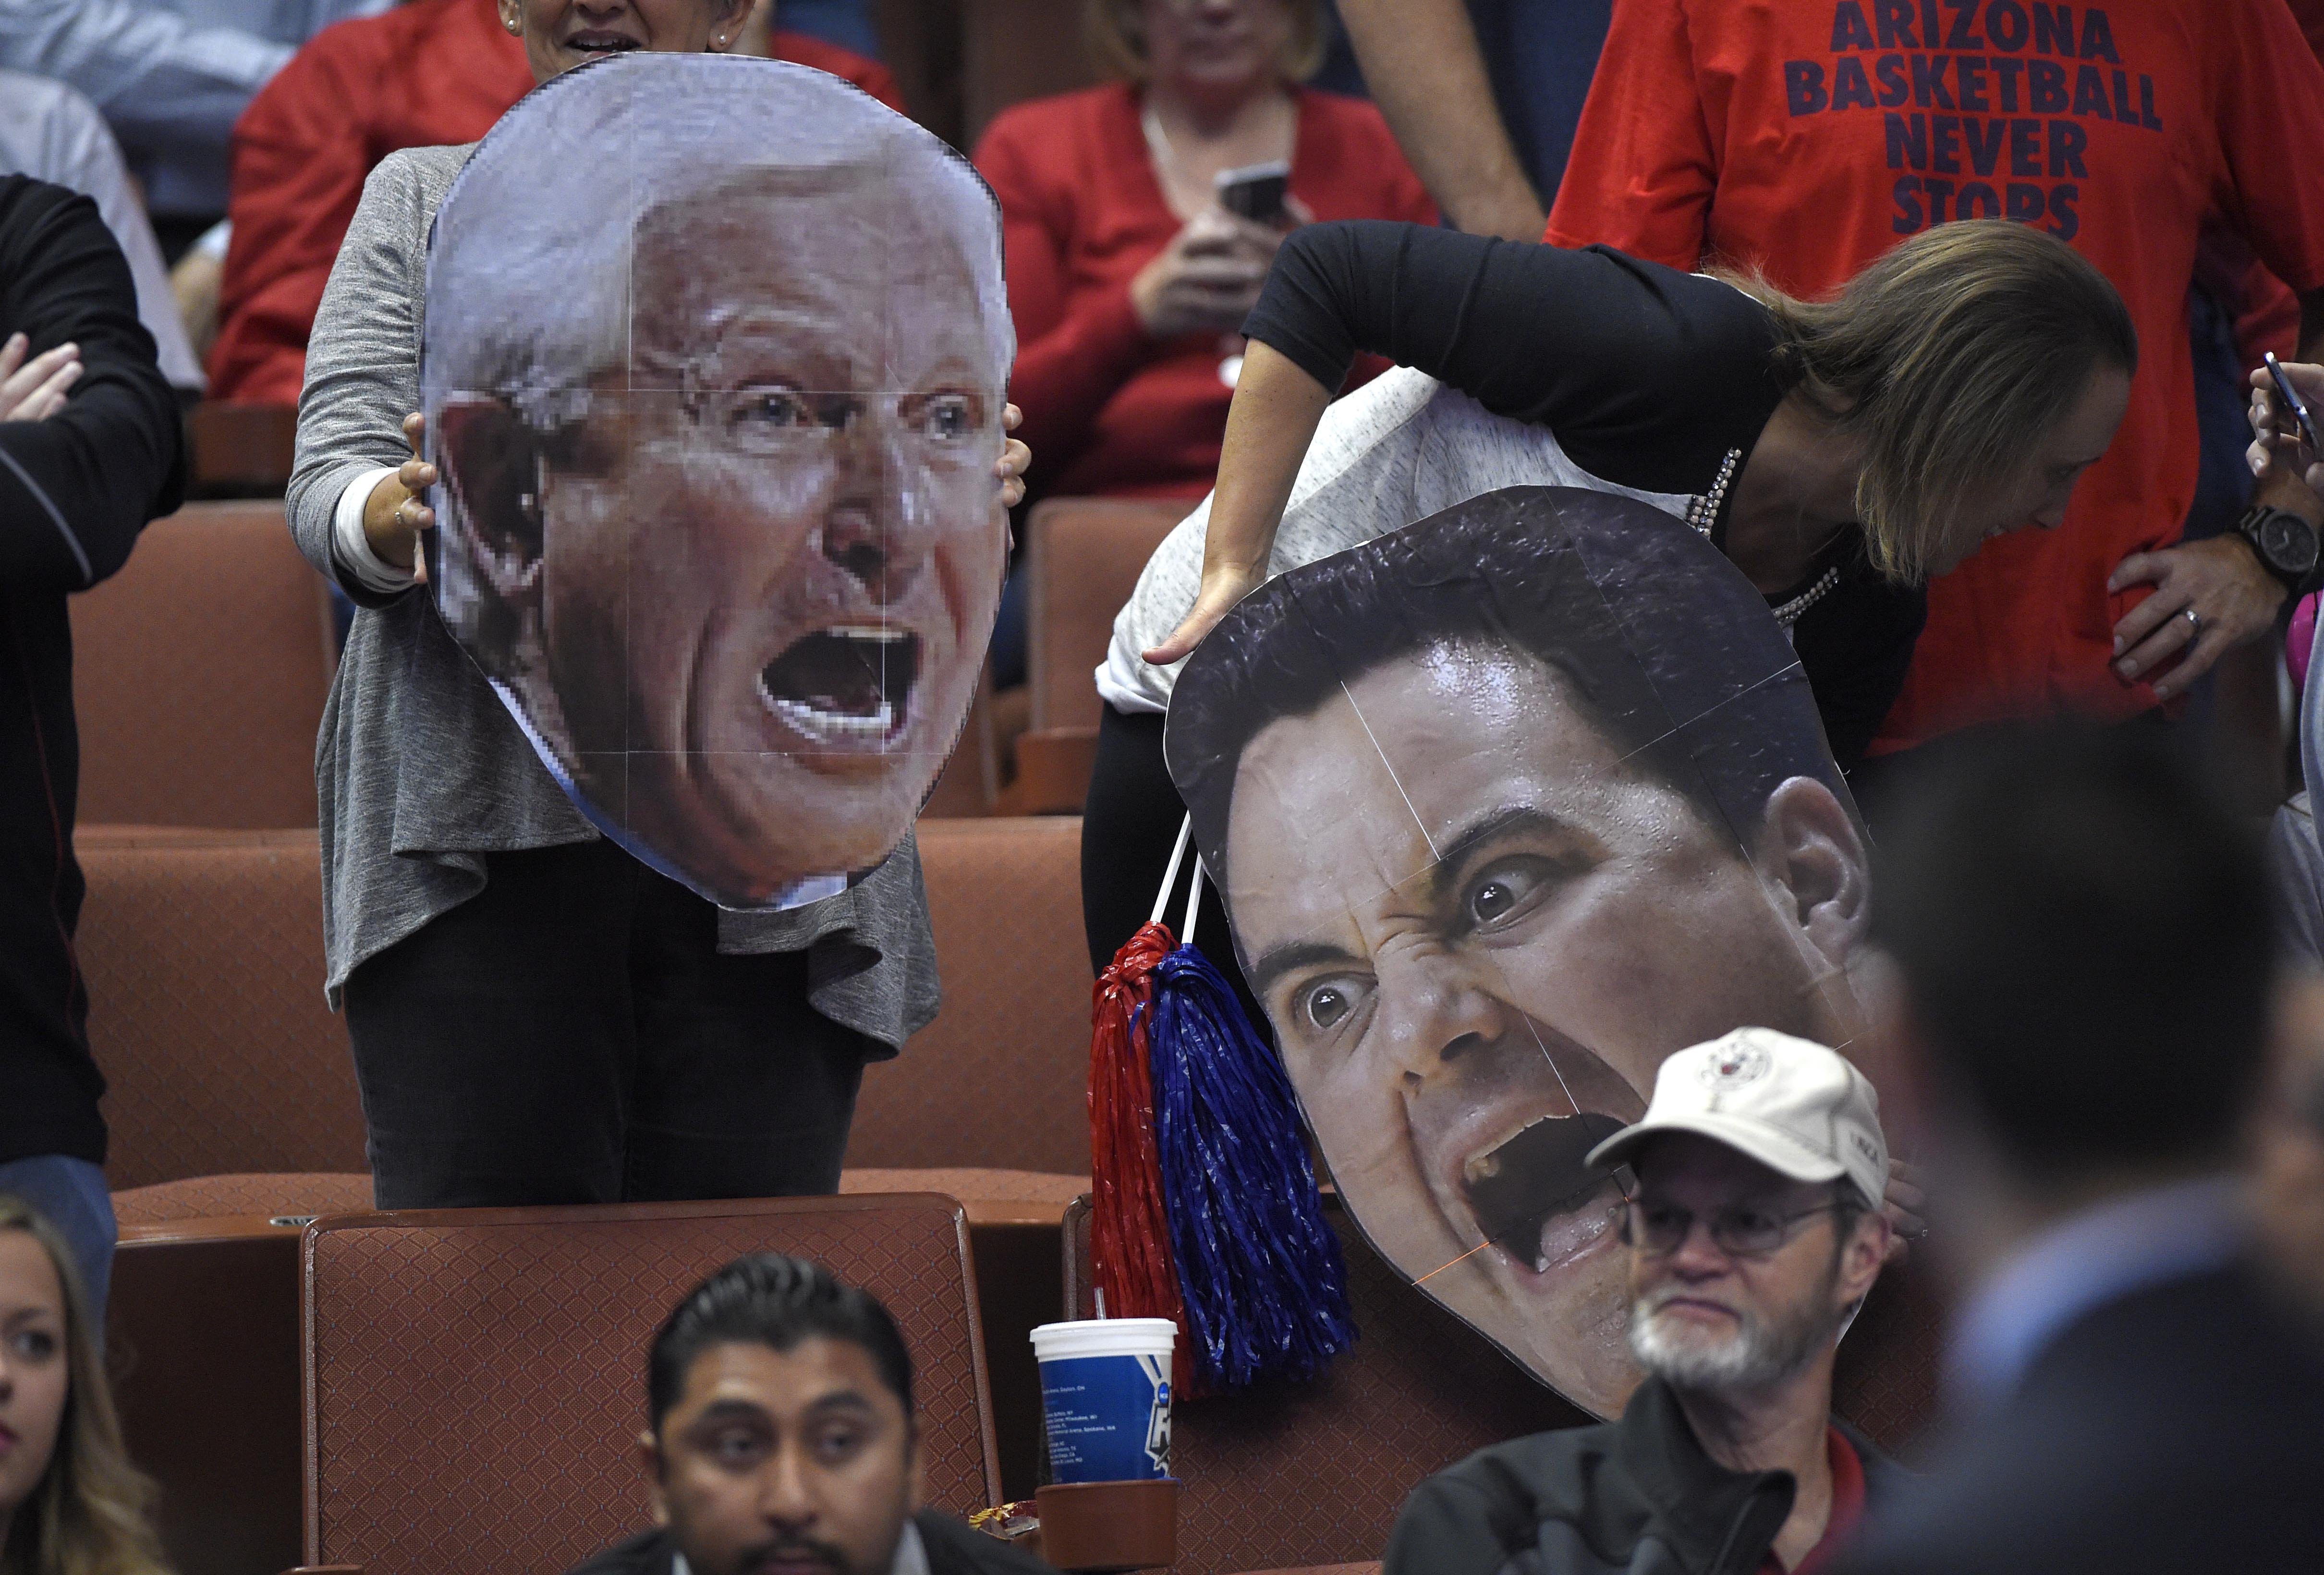 Arizona fans hold cutouts of former coach Lute Olsen, left, and current head Sean Miller prior to a regional semifinal NCAA college basketball tournament game, March 27, 2014, in Anaheim, Calif.